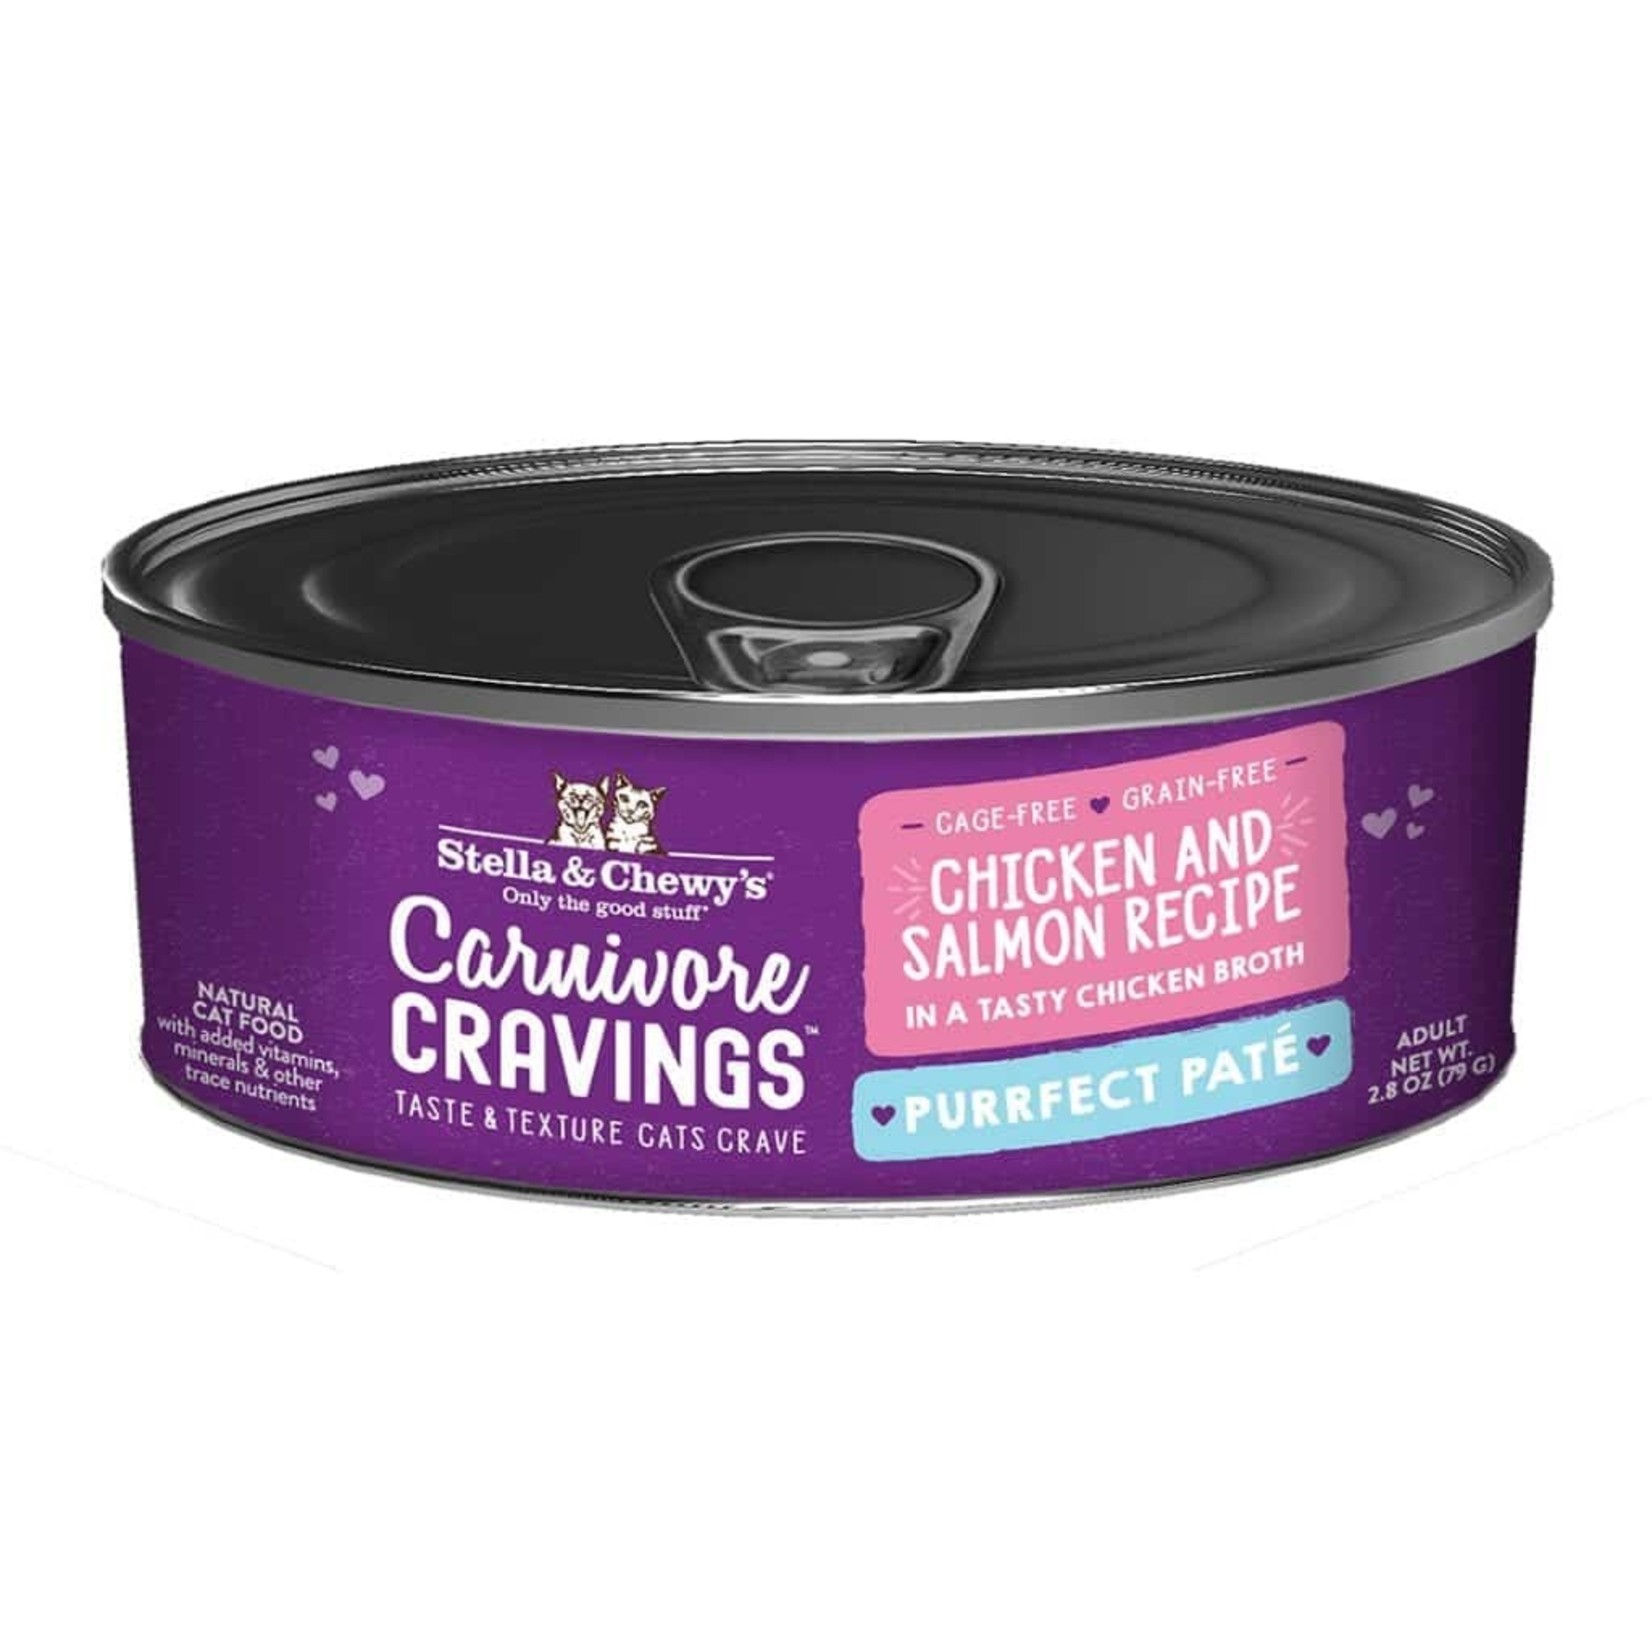 Stella and Chewys Stella & Chewy's Wet Cat Food Carnivore Cravings Purrfect Pate Chicken and Salmon Recipe 2.8oz Can Grain Free